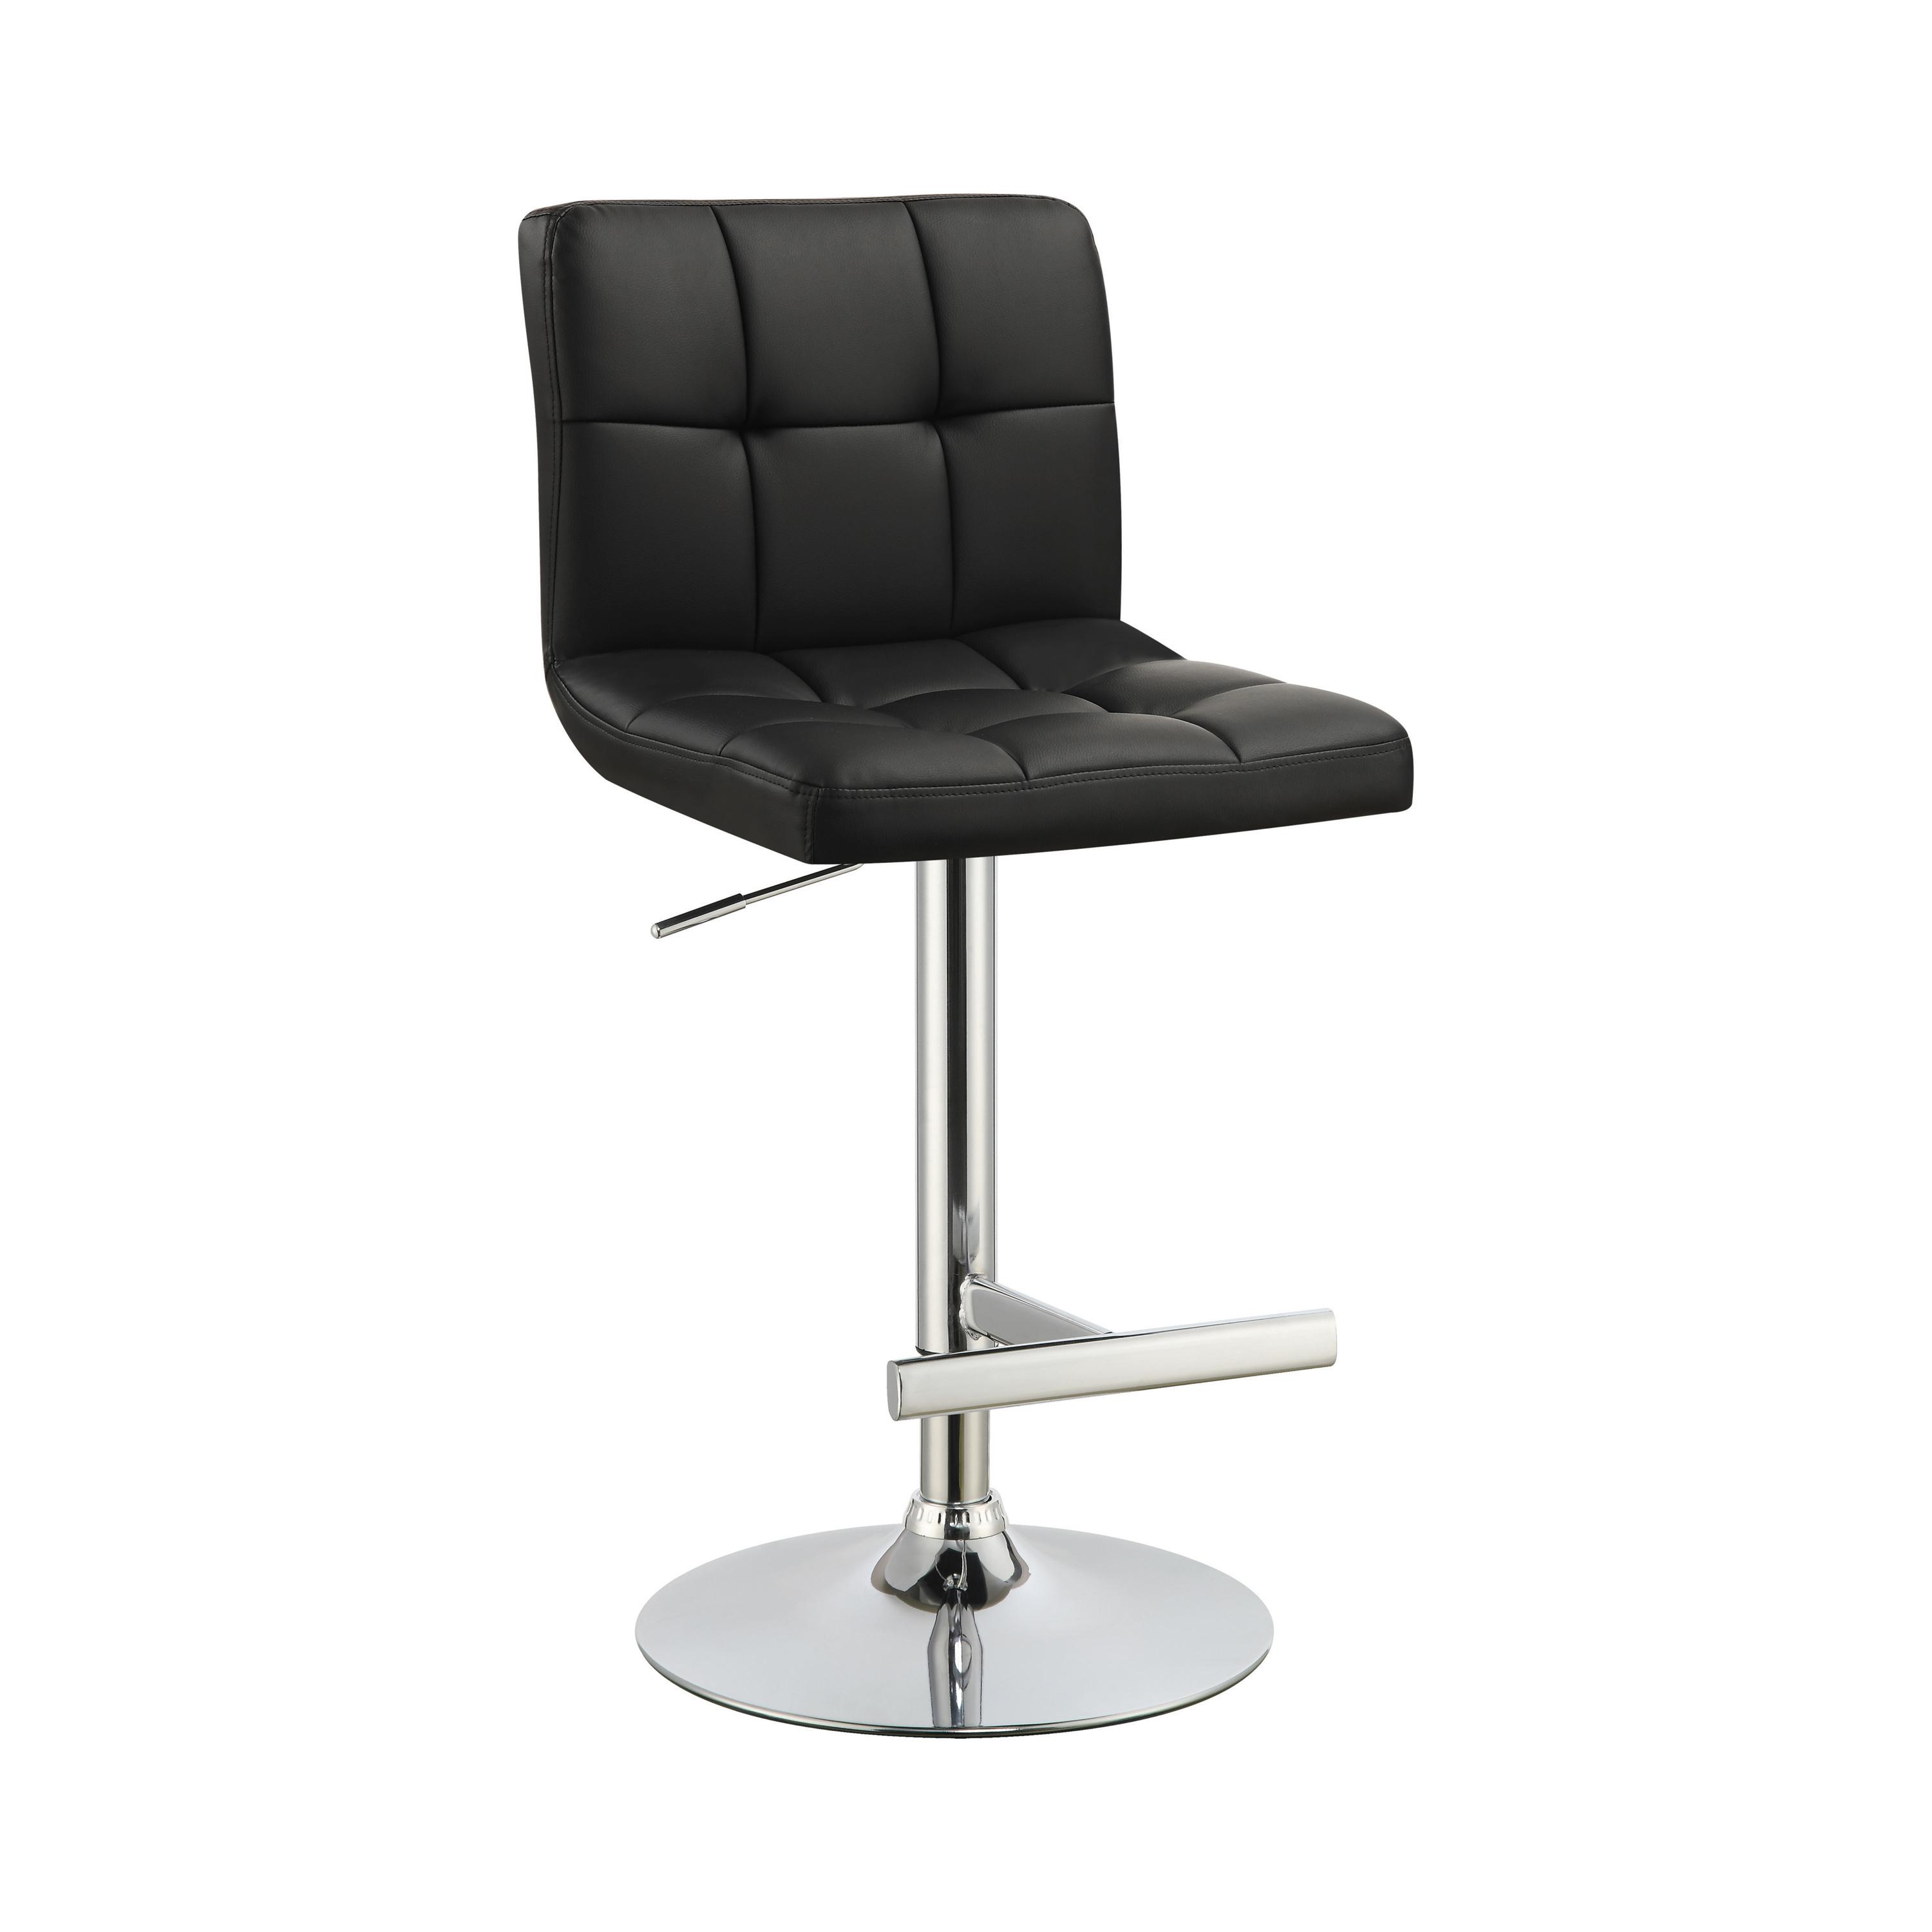 Contemporary Bar Stool Set 102554 102554 in Black Leatherette